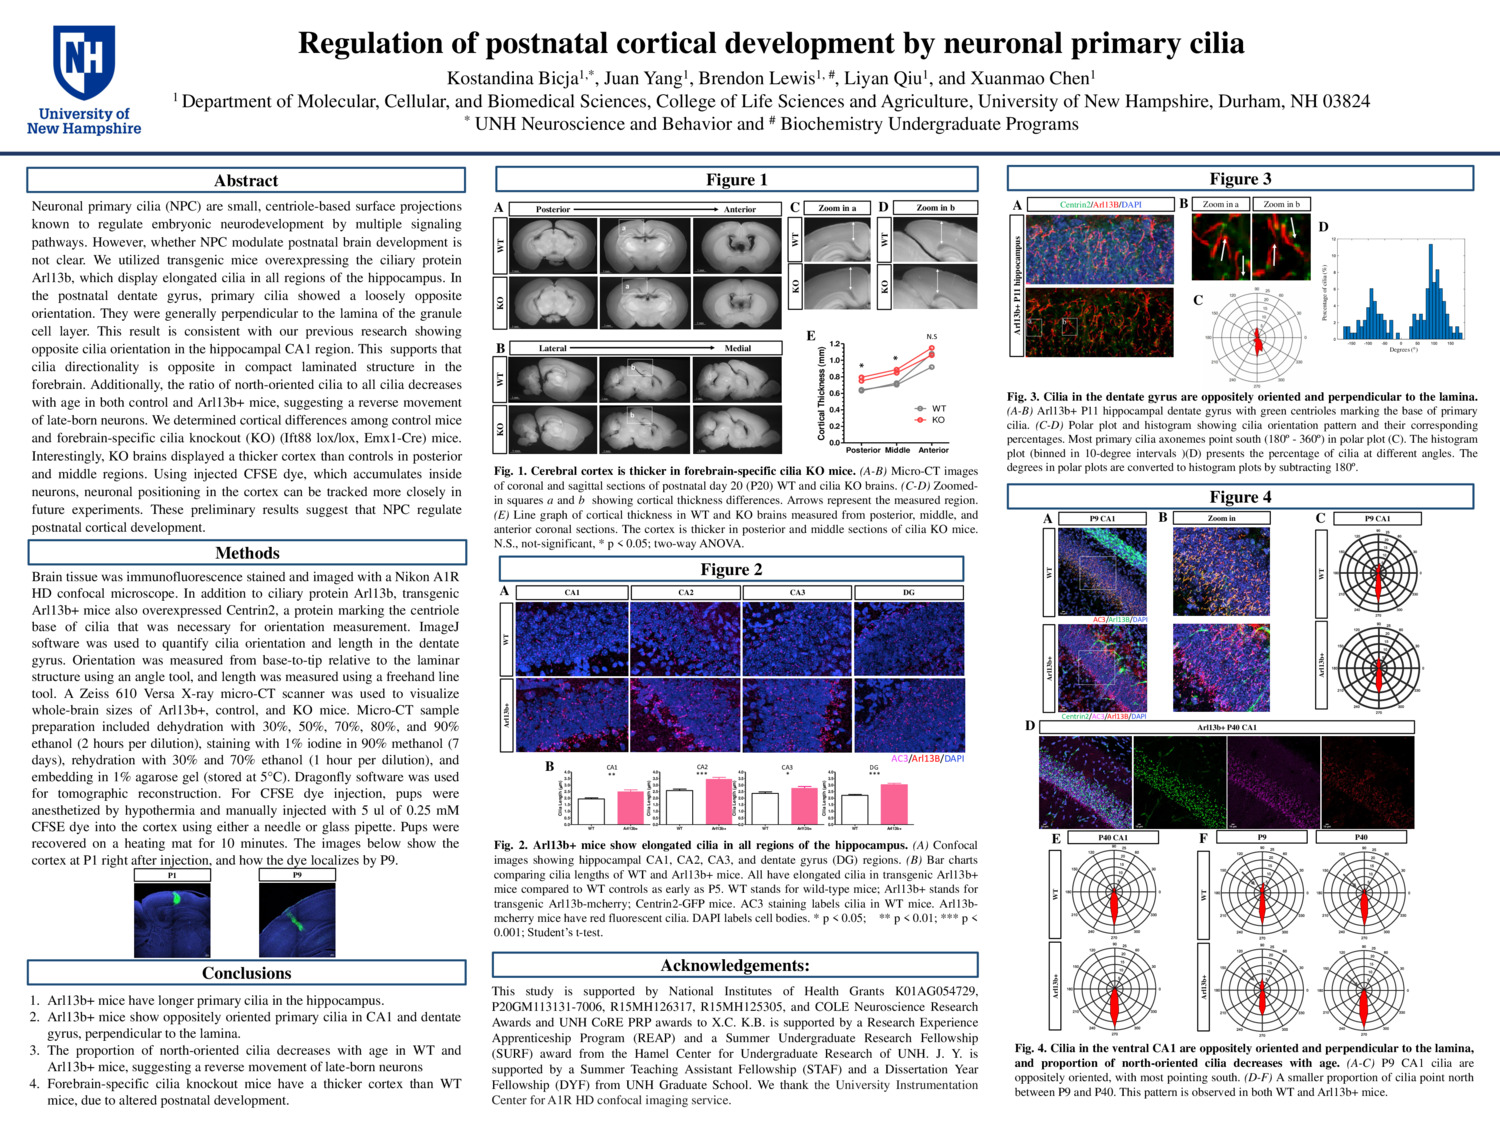 Regulation Of Postnatal Cortical Development By Neuronal Primary Cilia by kb1261